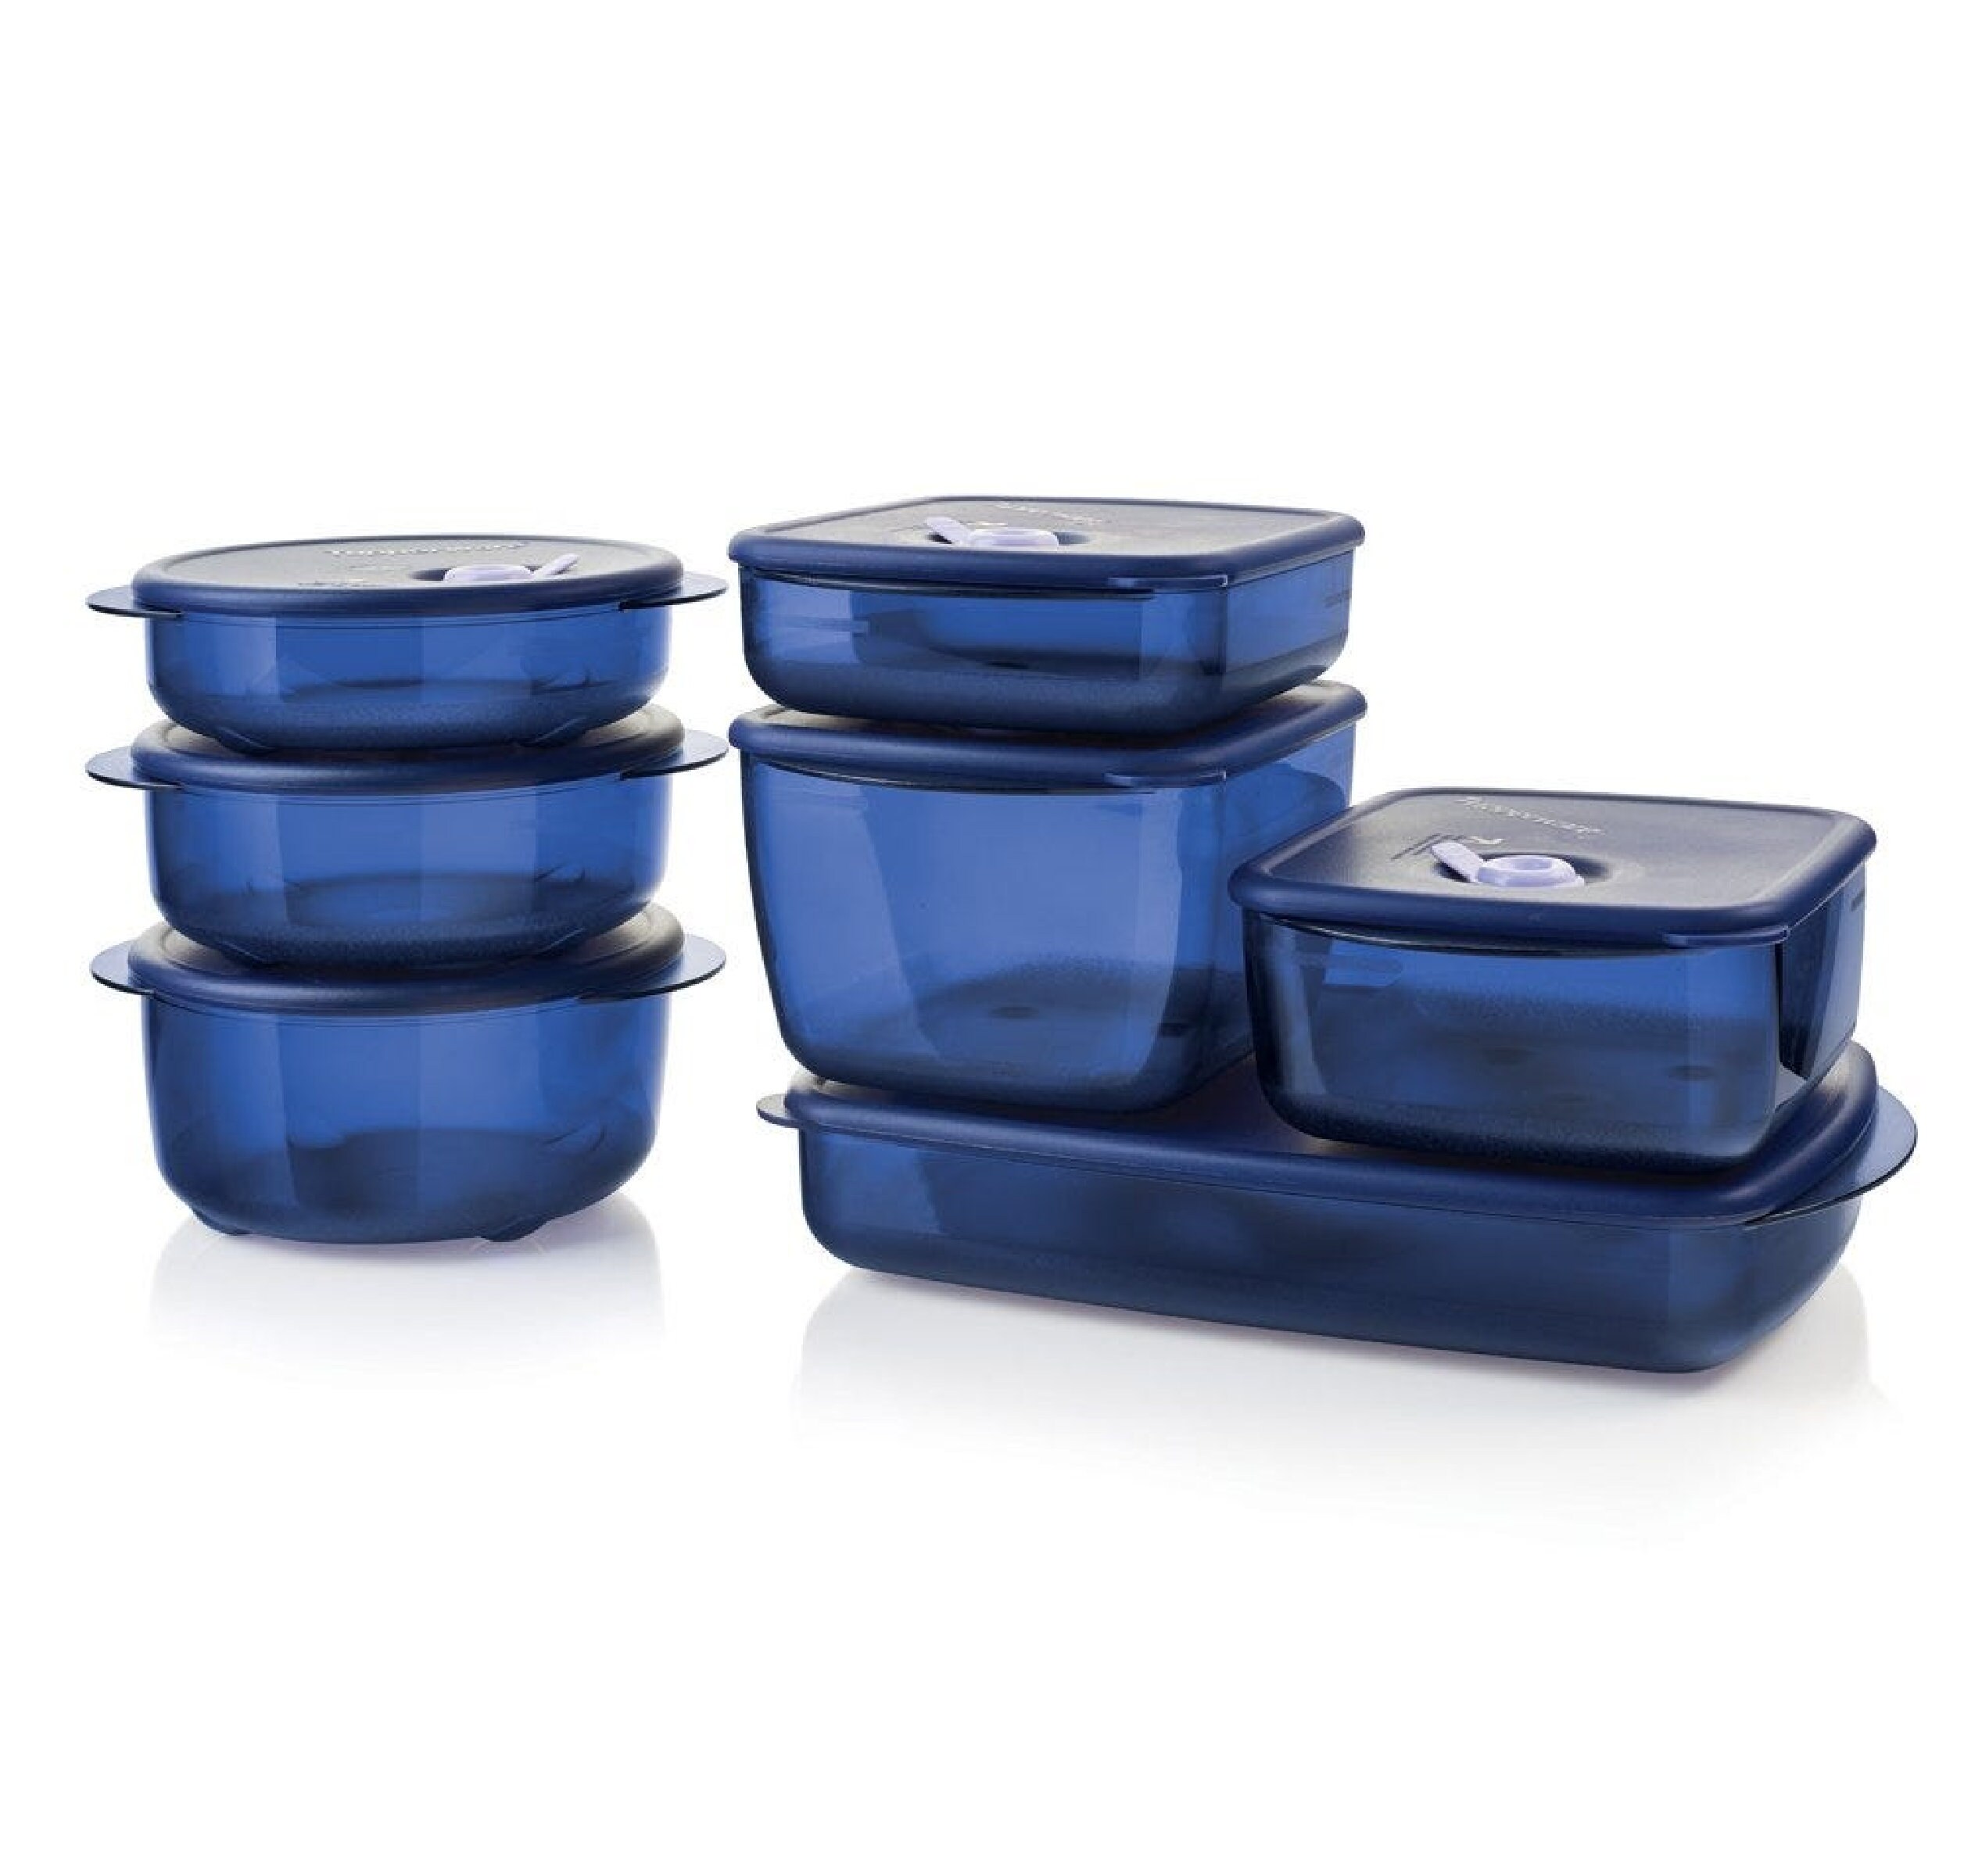 Tupperware Brand Vent 'N Serve Container Set - 3 Medium Shallow Containers  to Prep, Freeze & Reheat Meals + Lids - Dishwasher, Microwave & Freezer